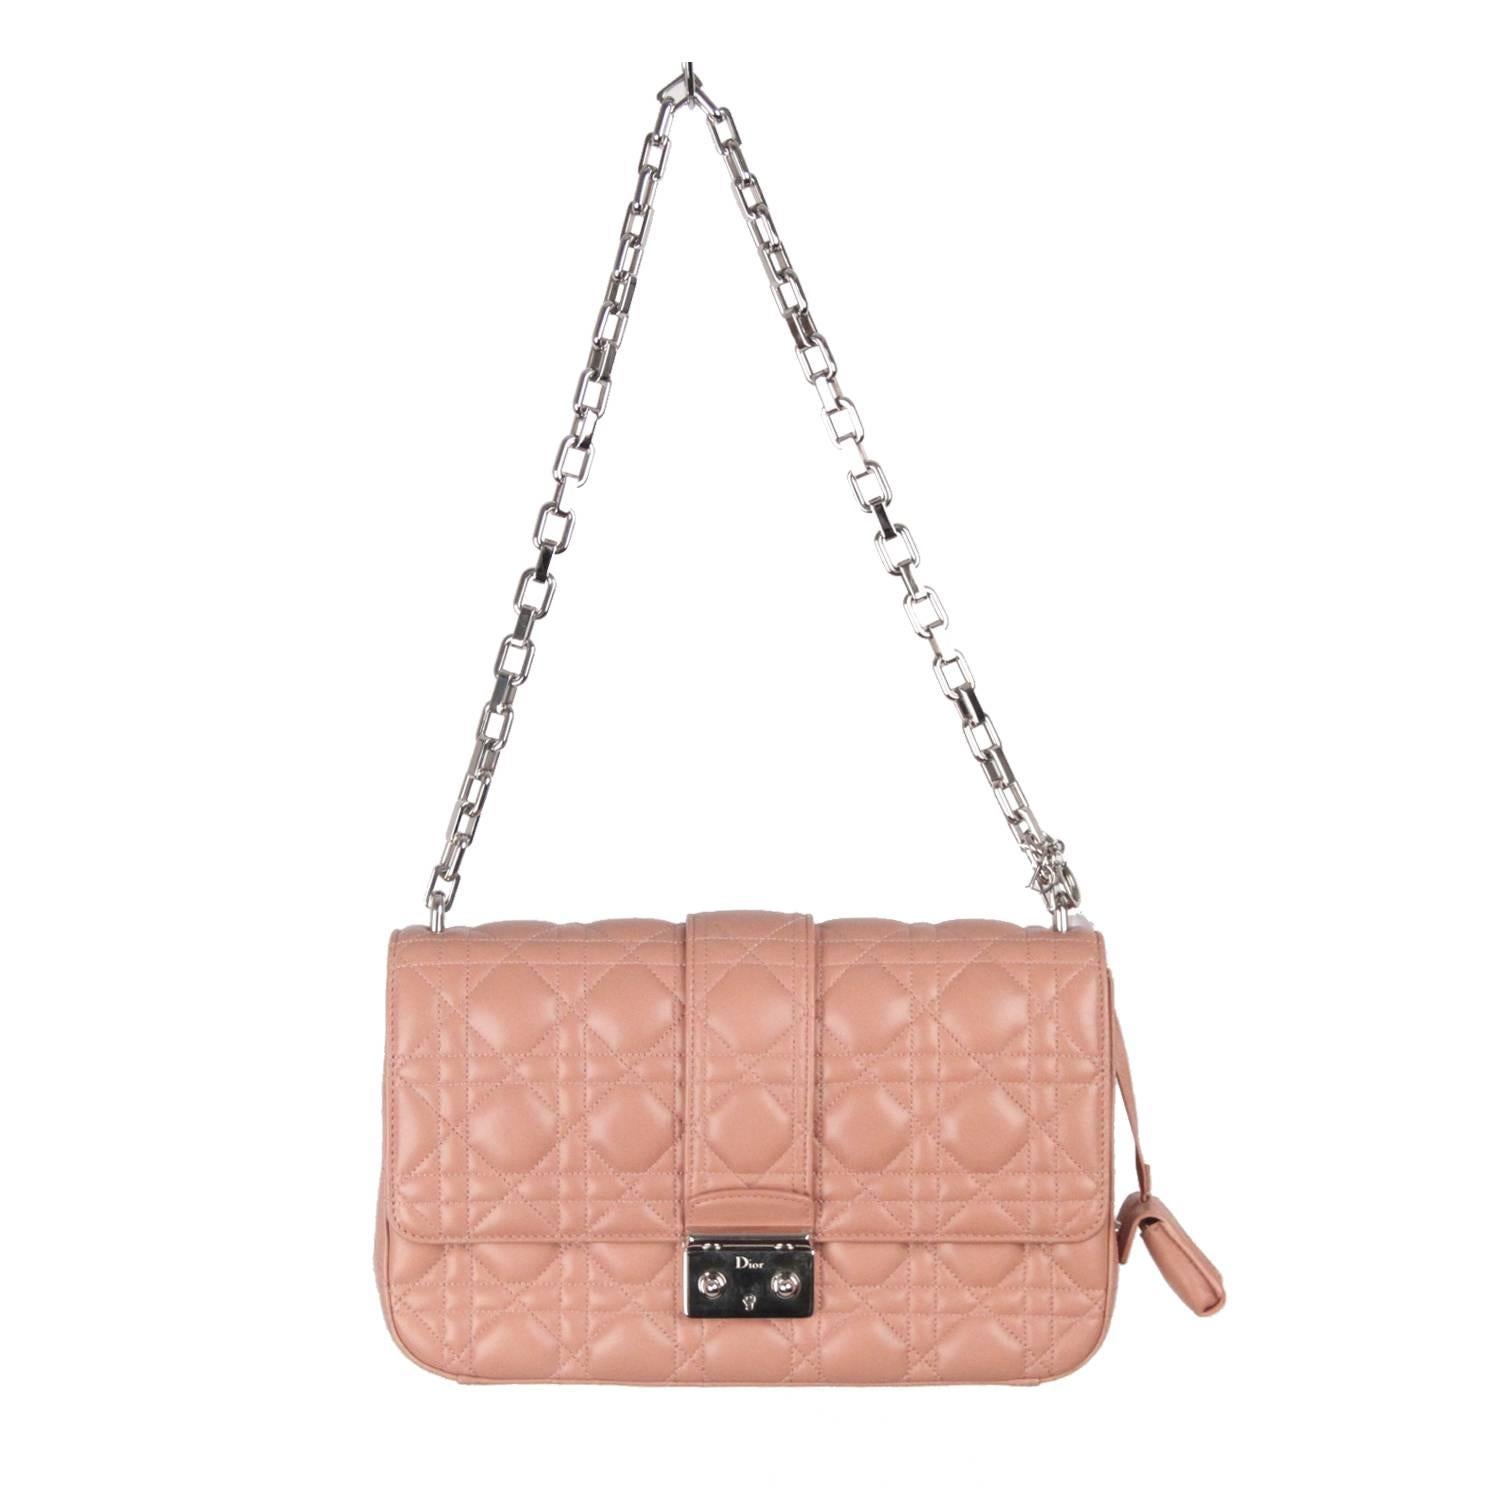 CHRISTIAN DIOR Pink CANNAGE Quilted Leather MISS DIOR Shoulder Bag